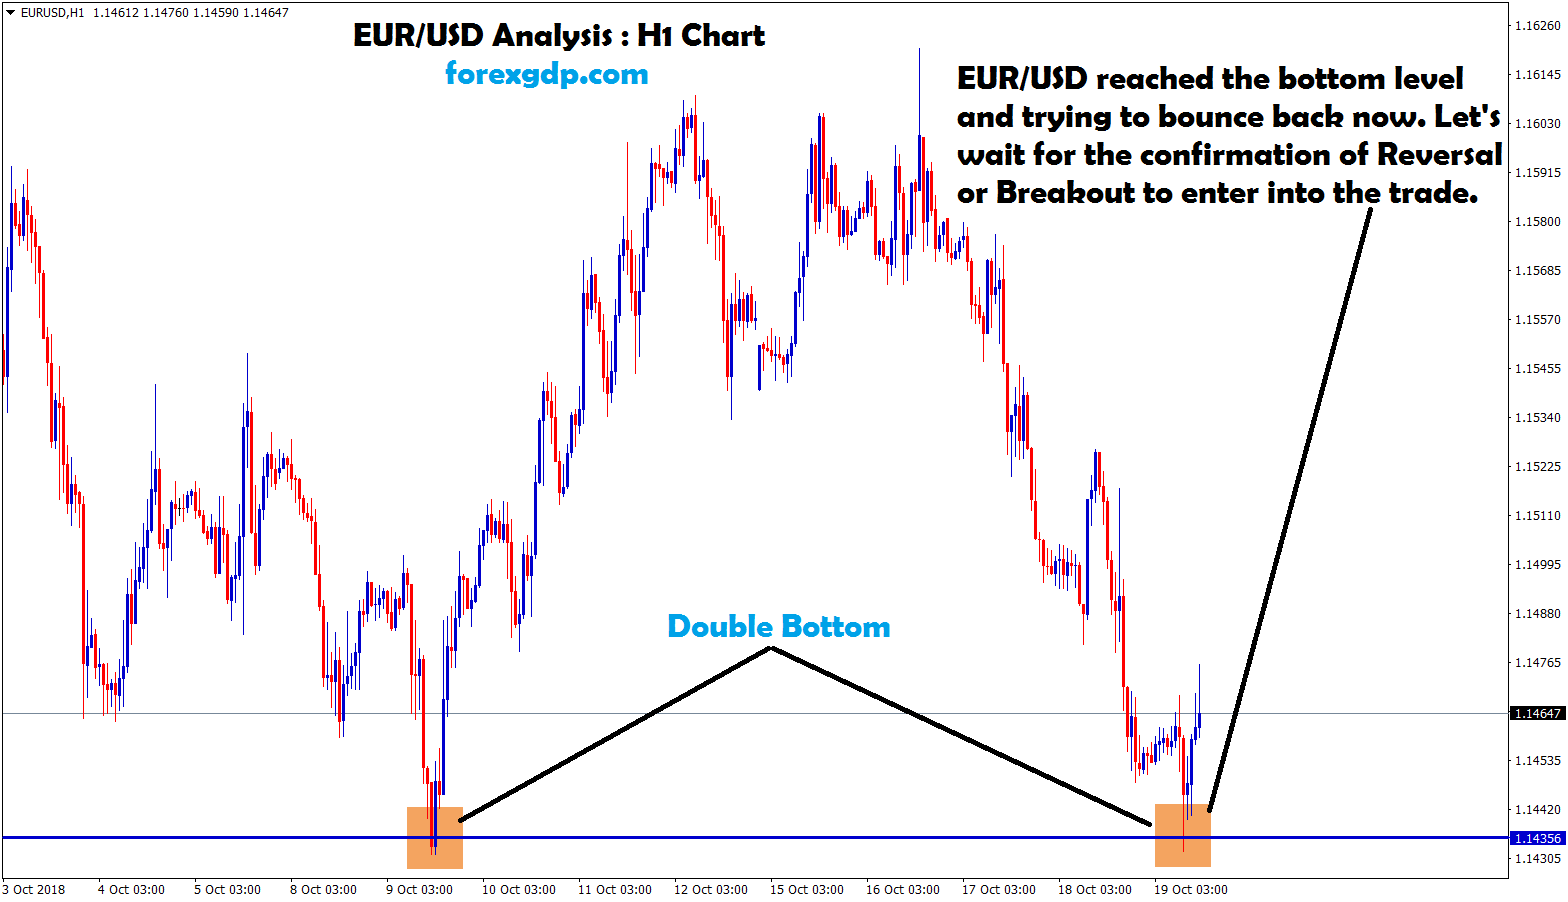 eur usd touched the bottom level twice